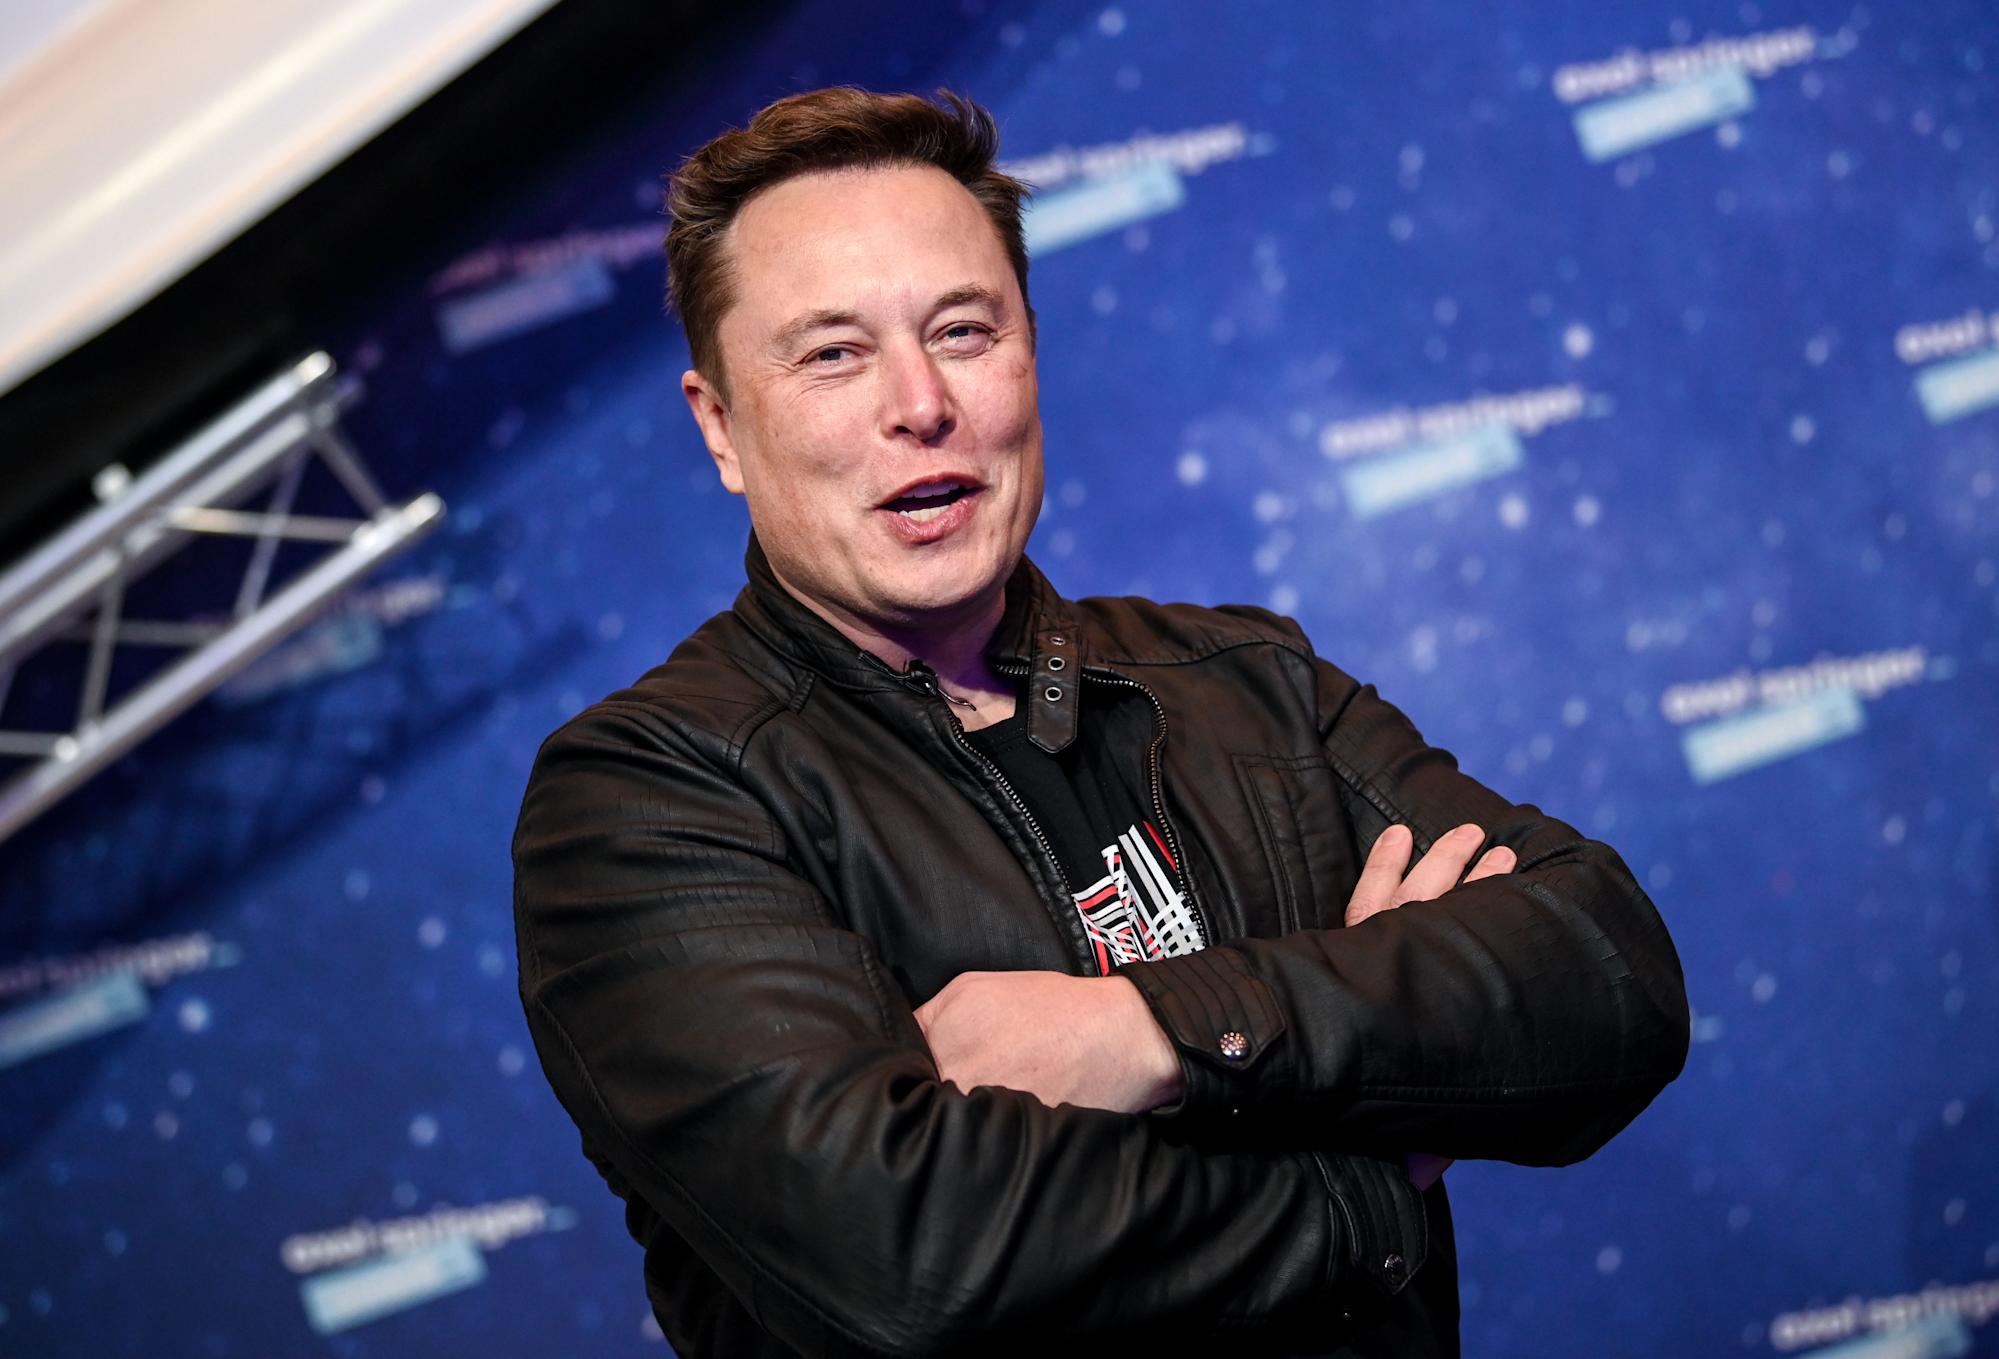 Elon Musk lives in a prefab “house” next to the SpaceX base for which he pays $250 a month.